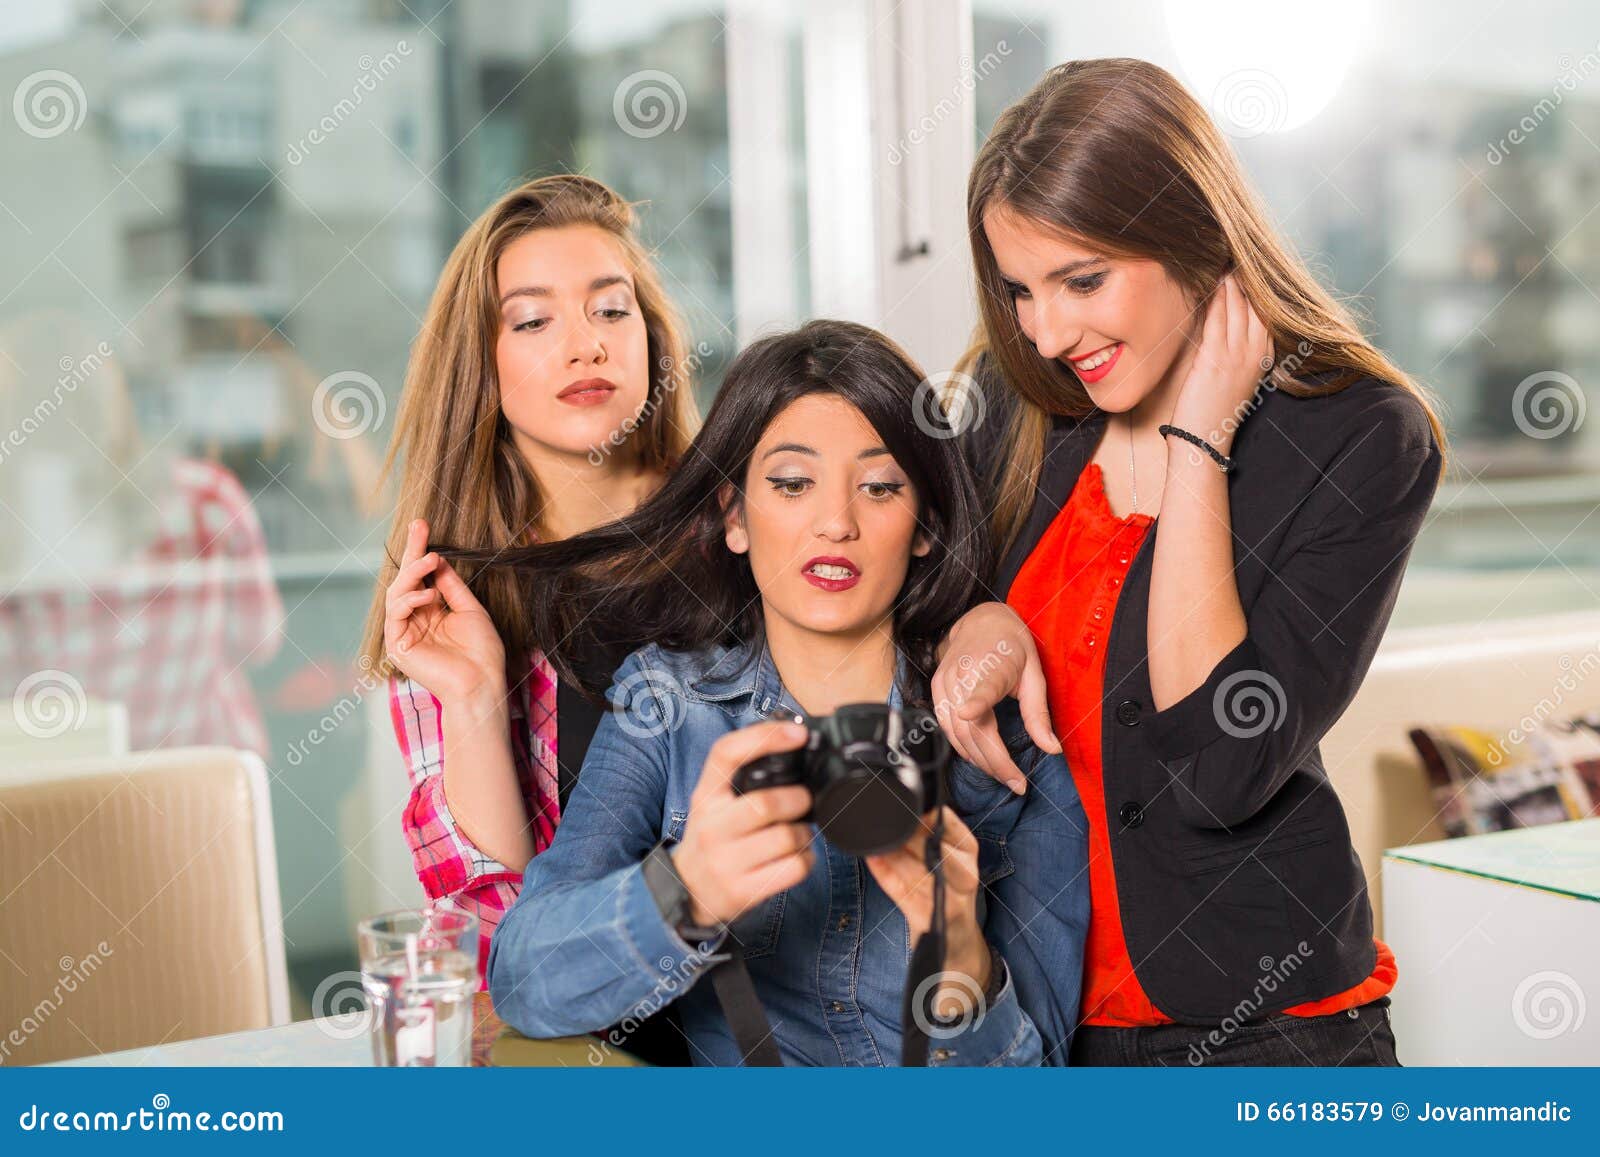 Teenager Girls Hanging Out Together Stock Image - Image of friends ...